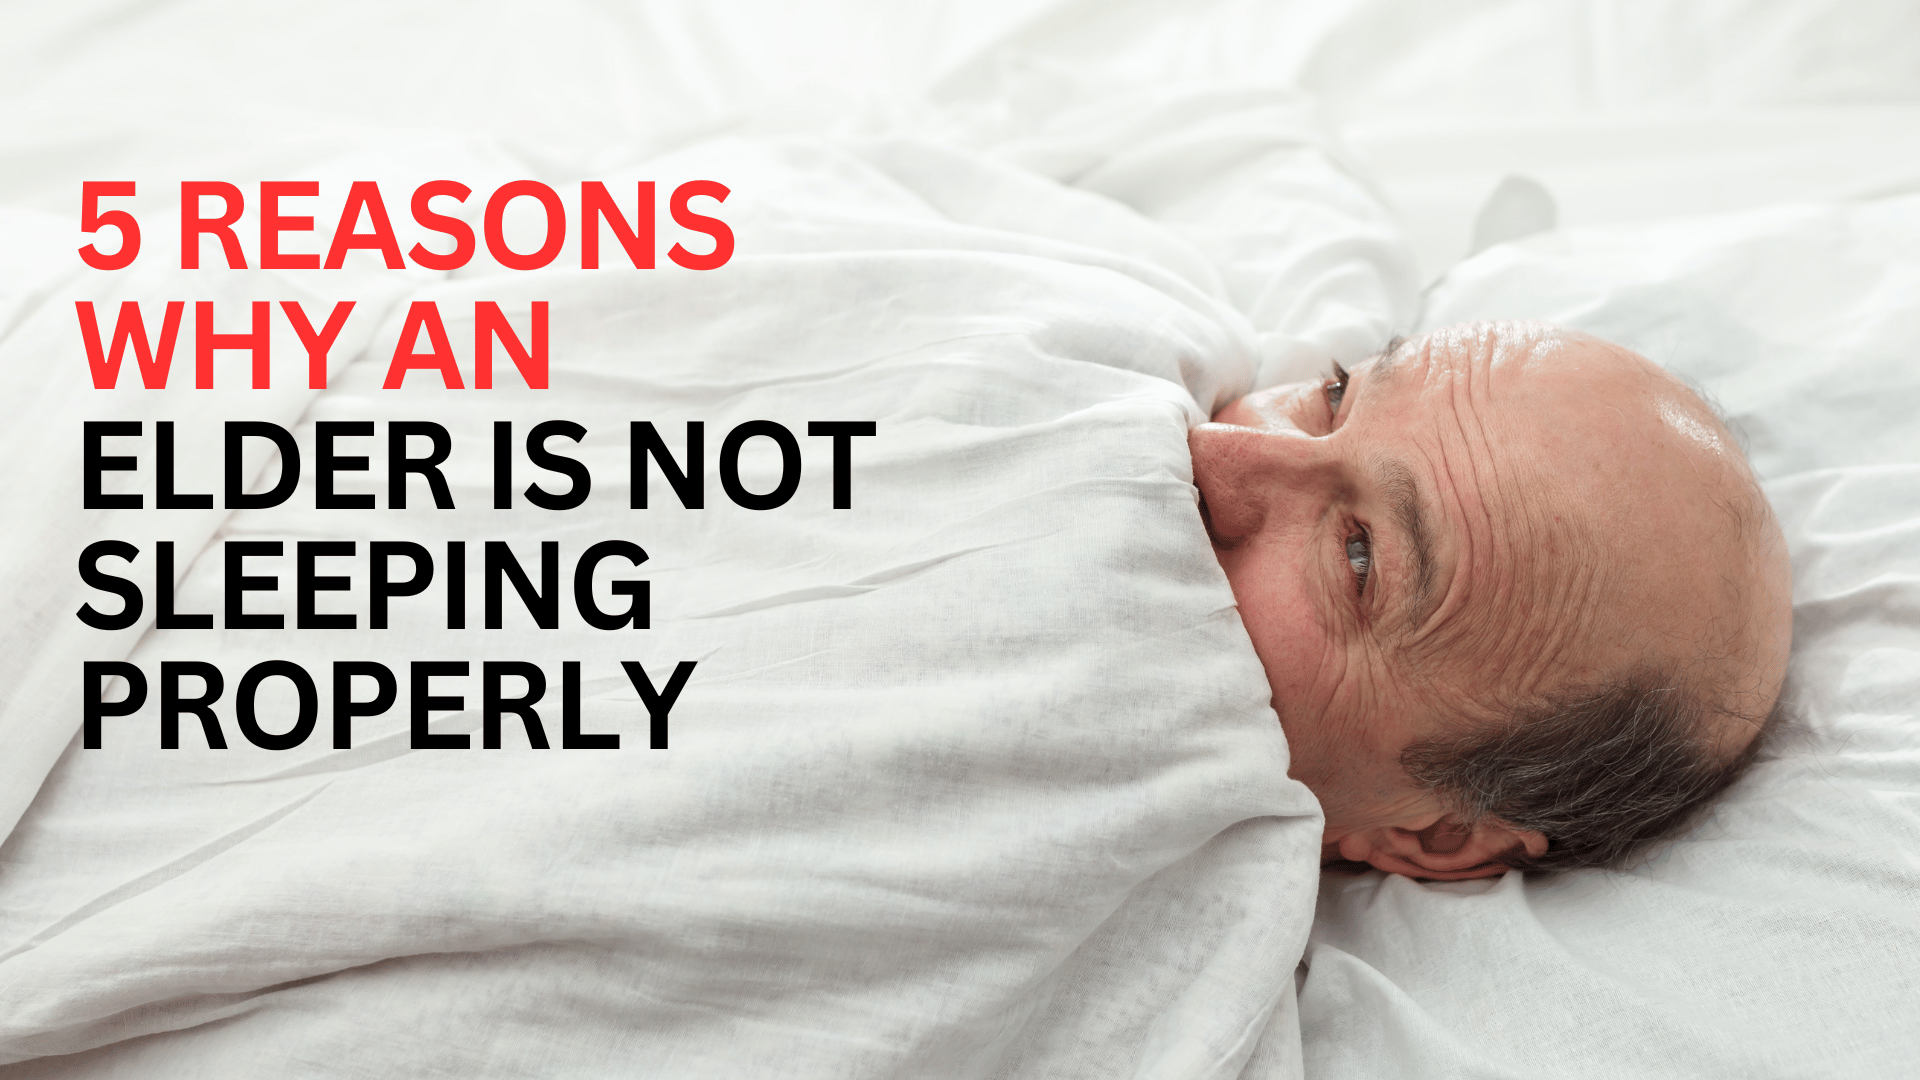 5 REASONS WHY AN ELDER IS NOT SLEEPING PROPERLY